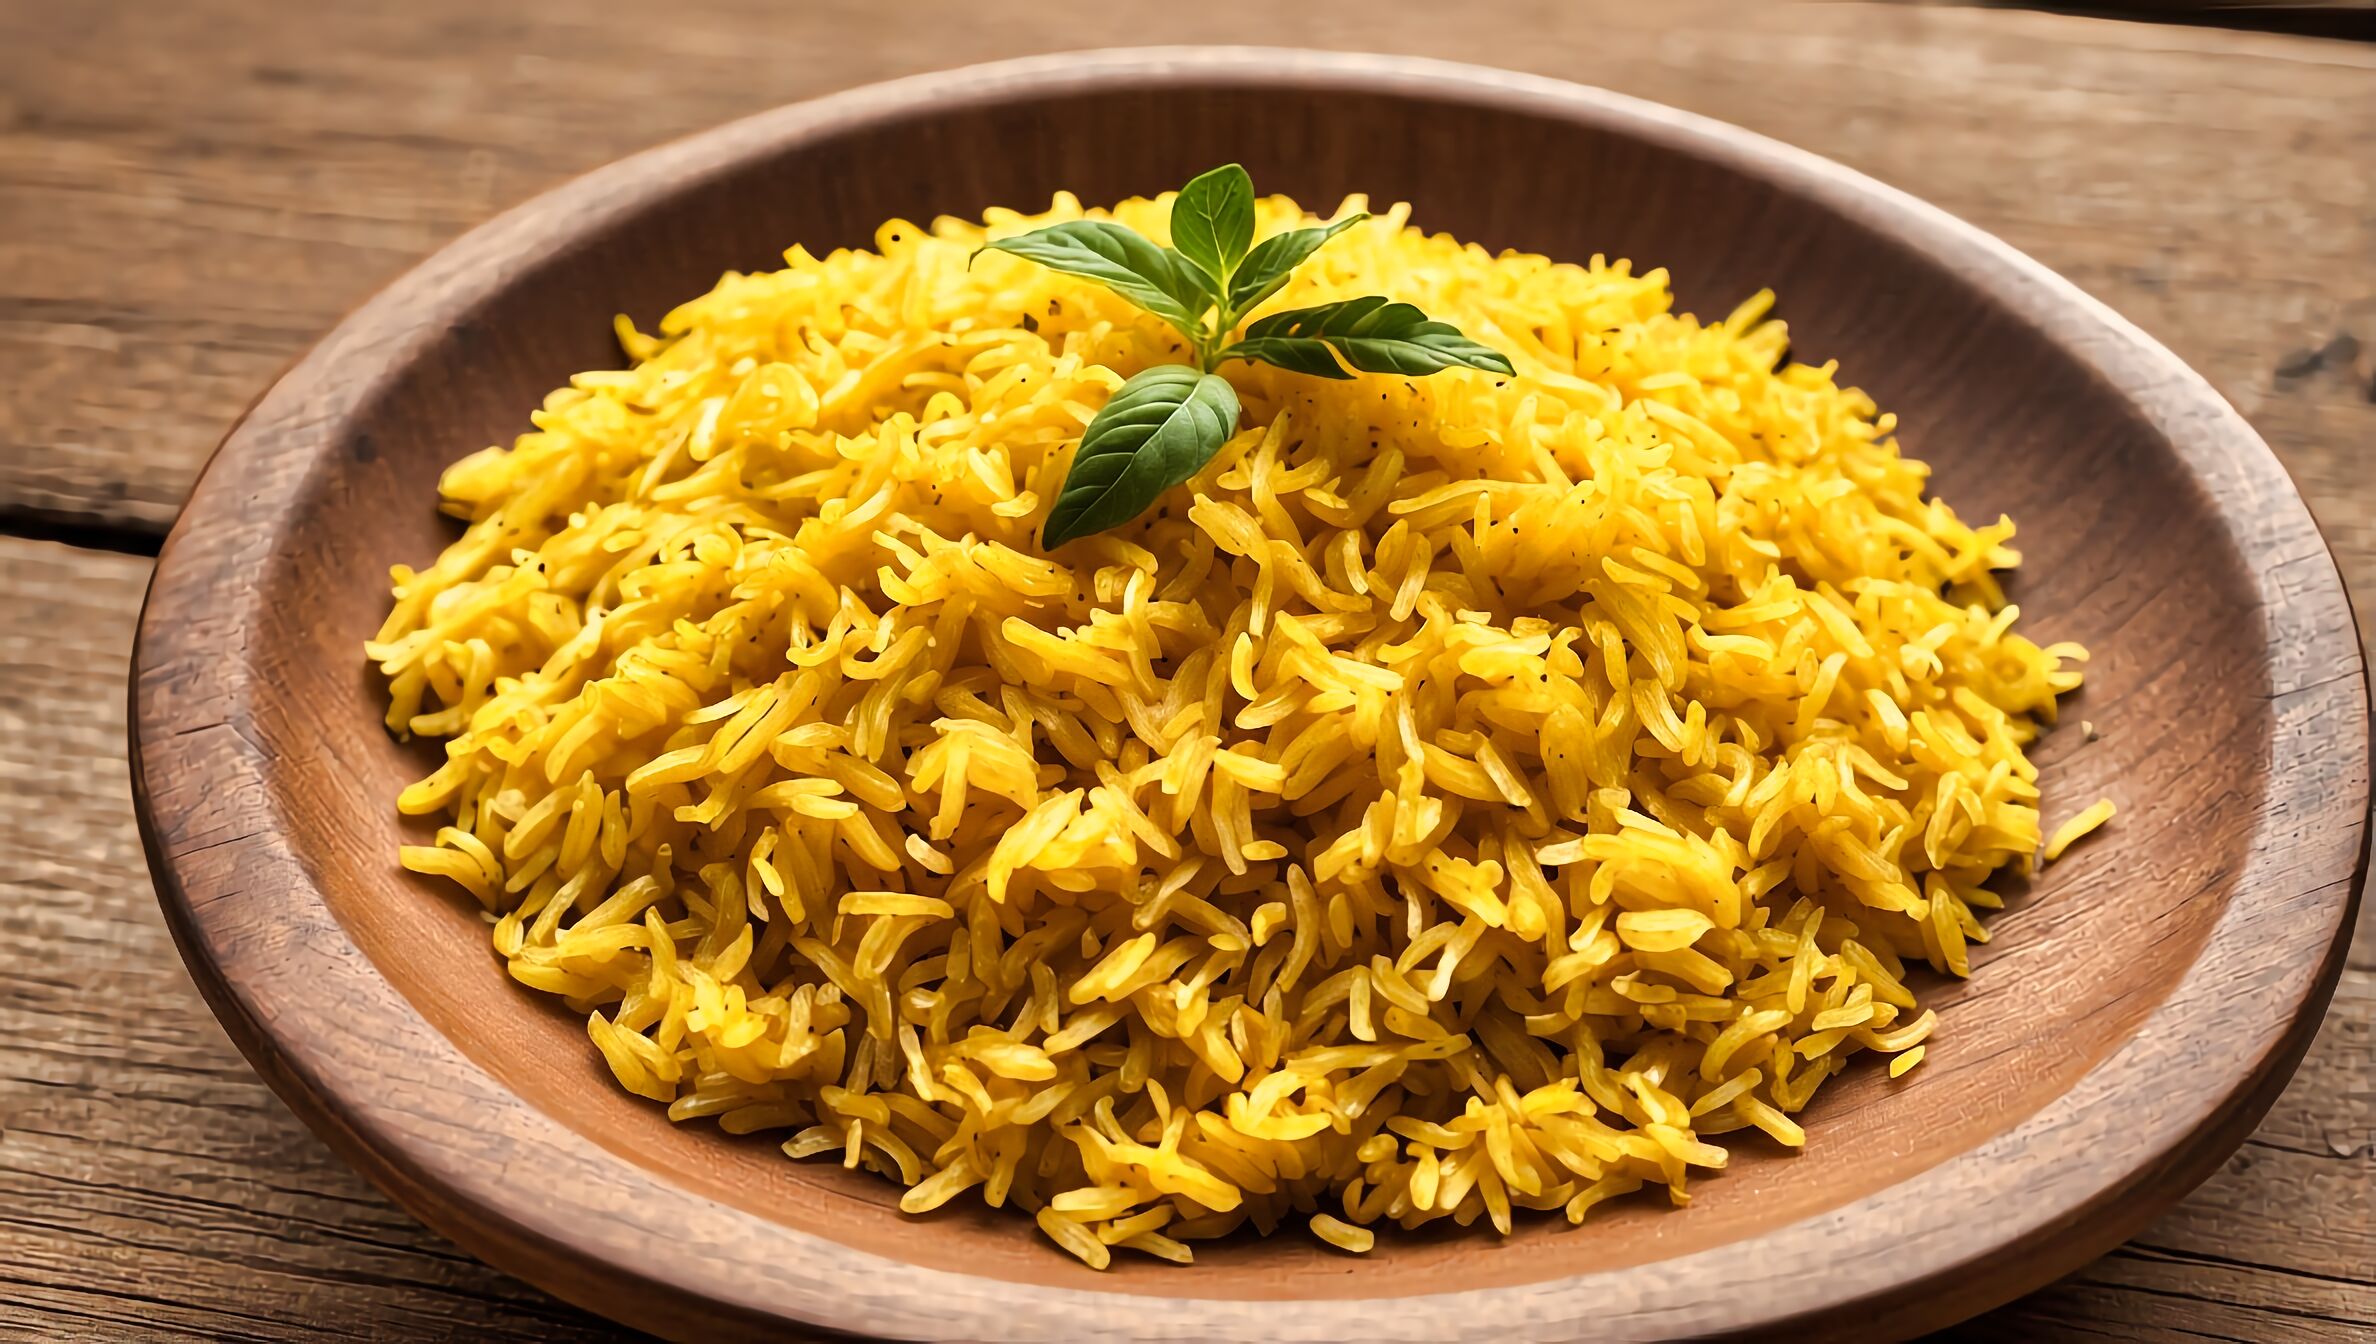 South African Yellow Rice Recipe